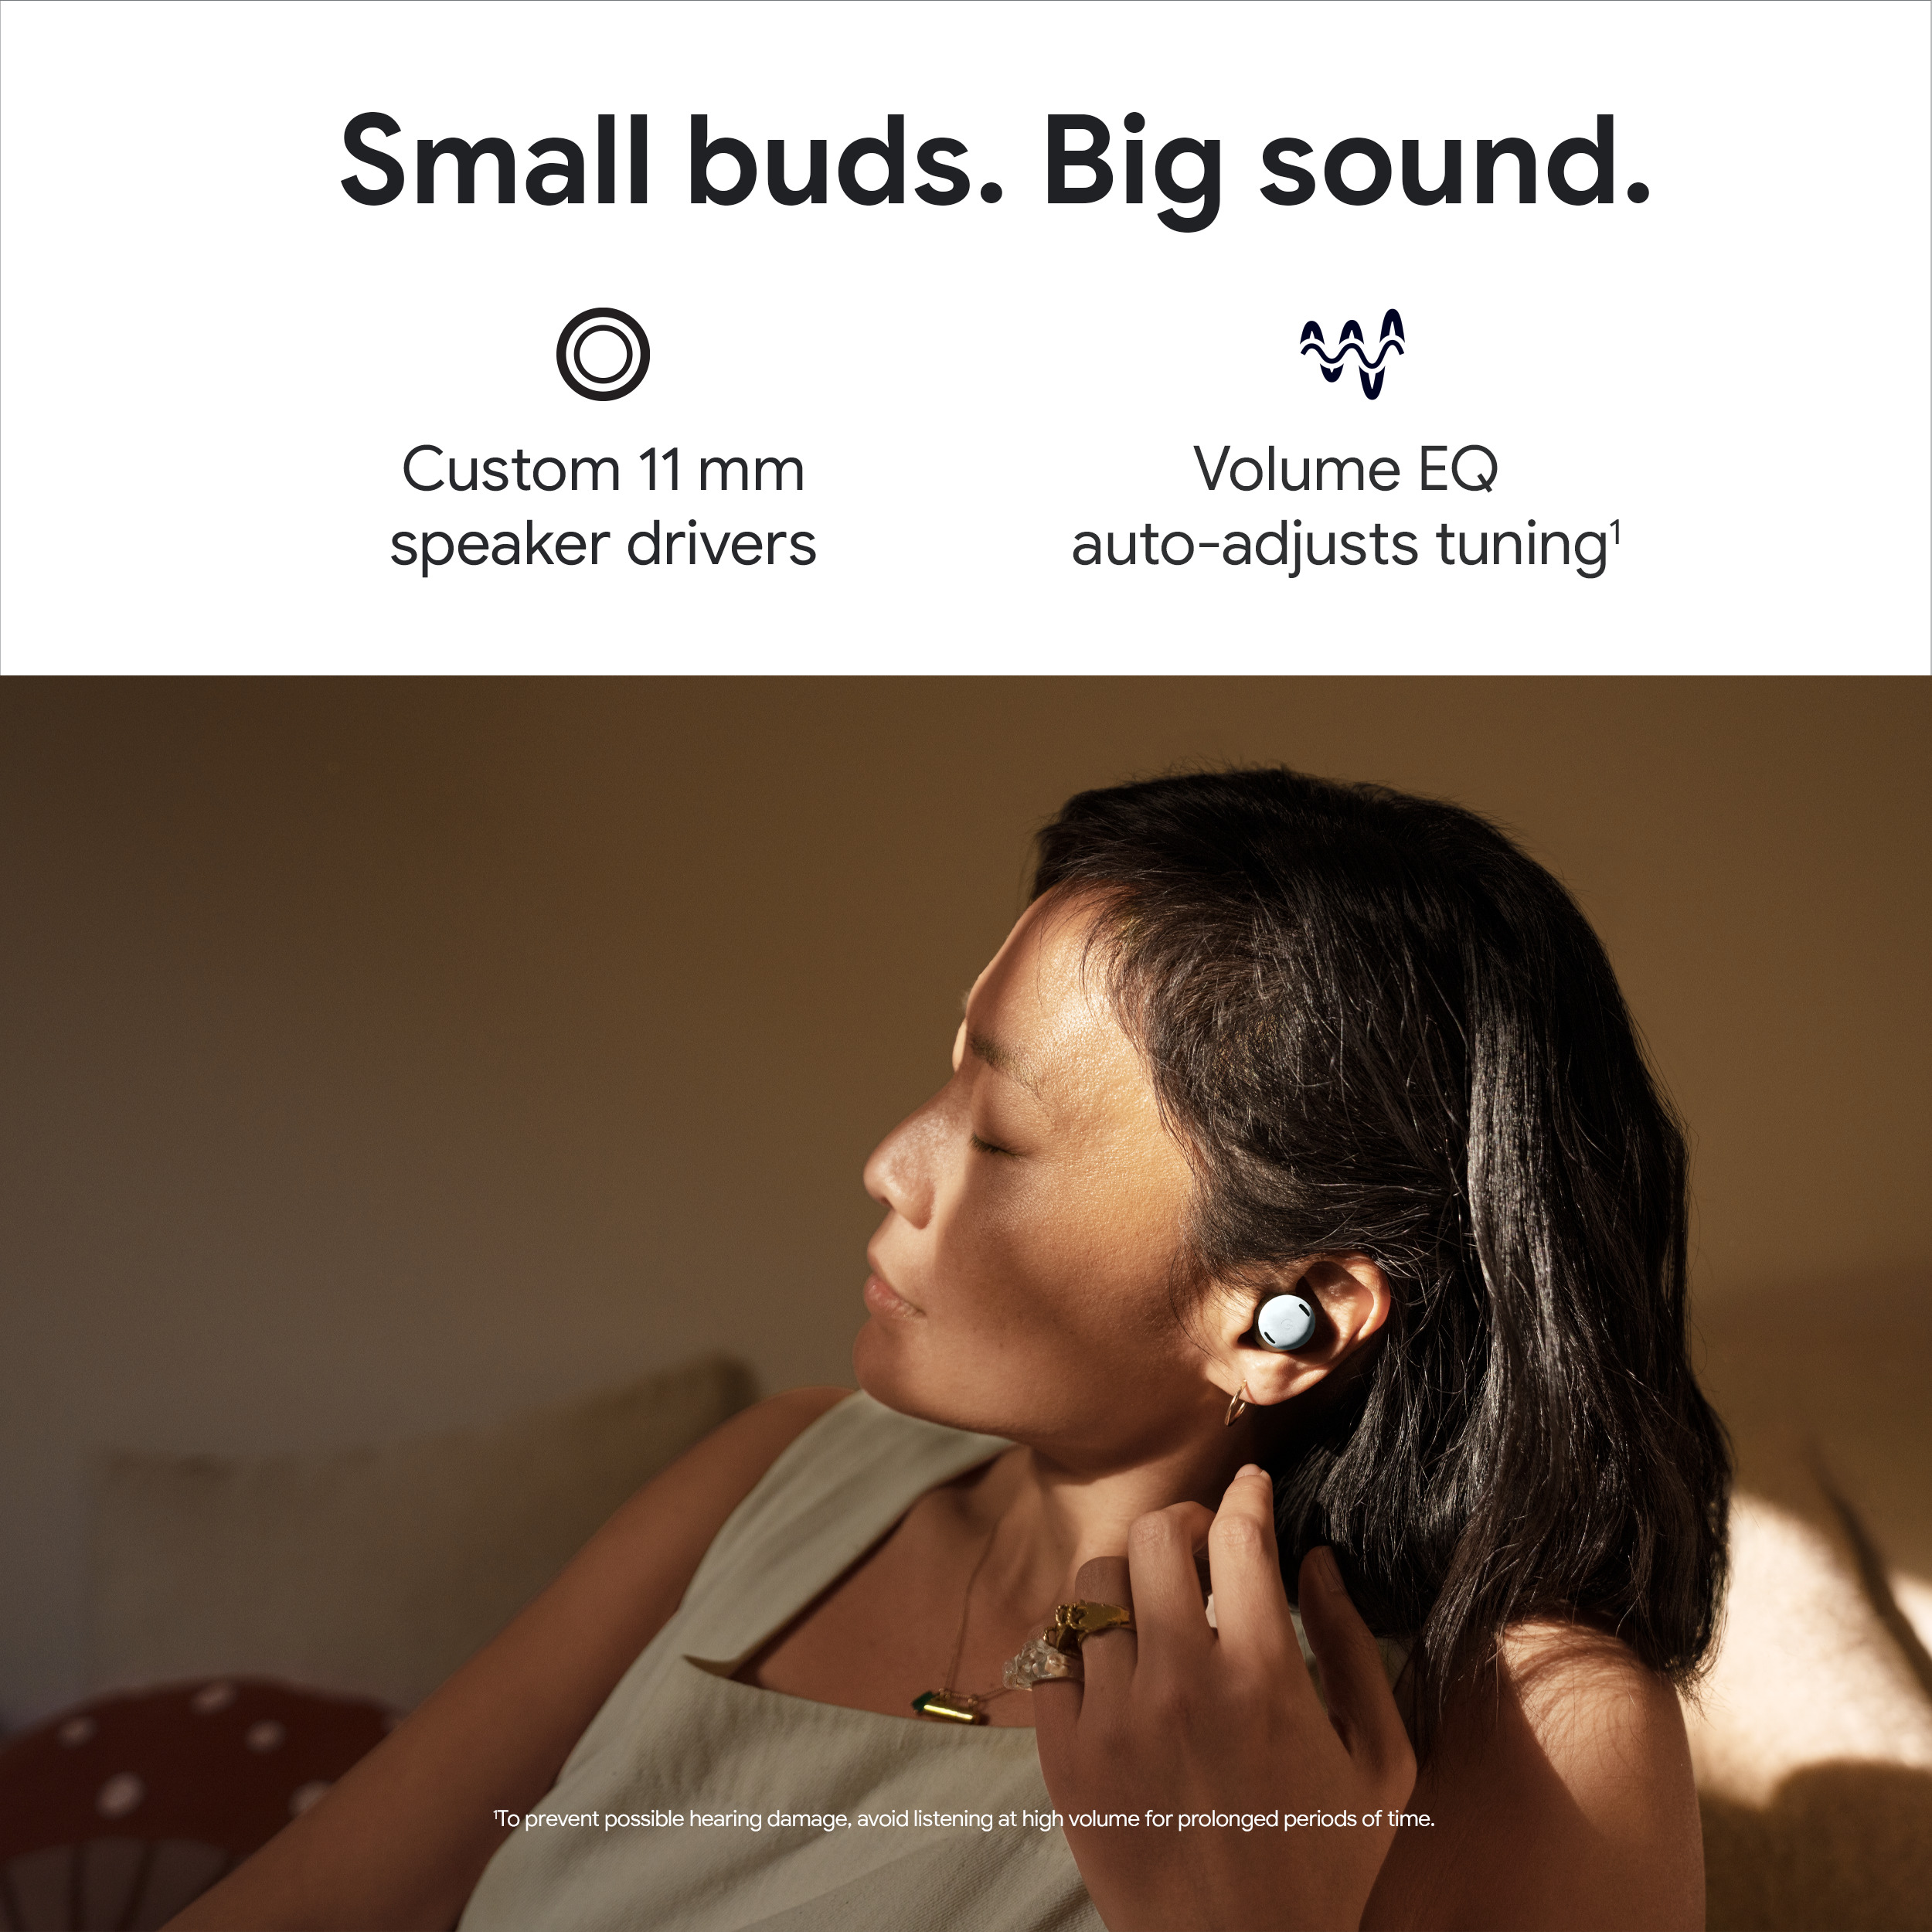 Google Pixel Buds Pro - Wireless Earbuds with Active Noise Cancellation - Bluetooth Earbuds - Charcoal - image 2 of 8